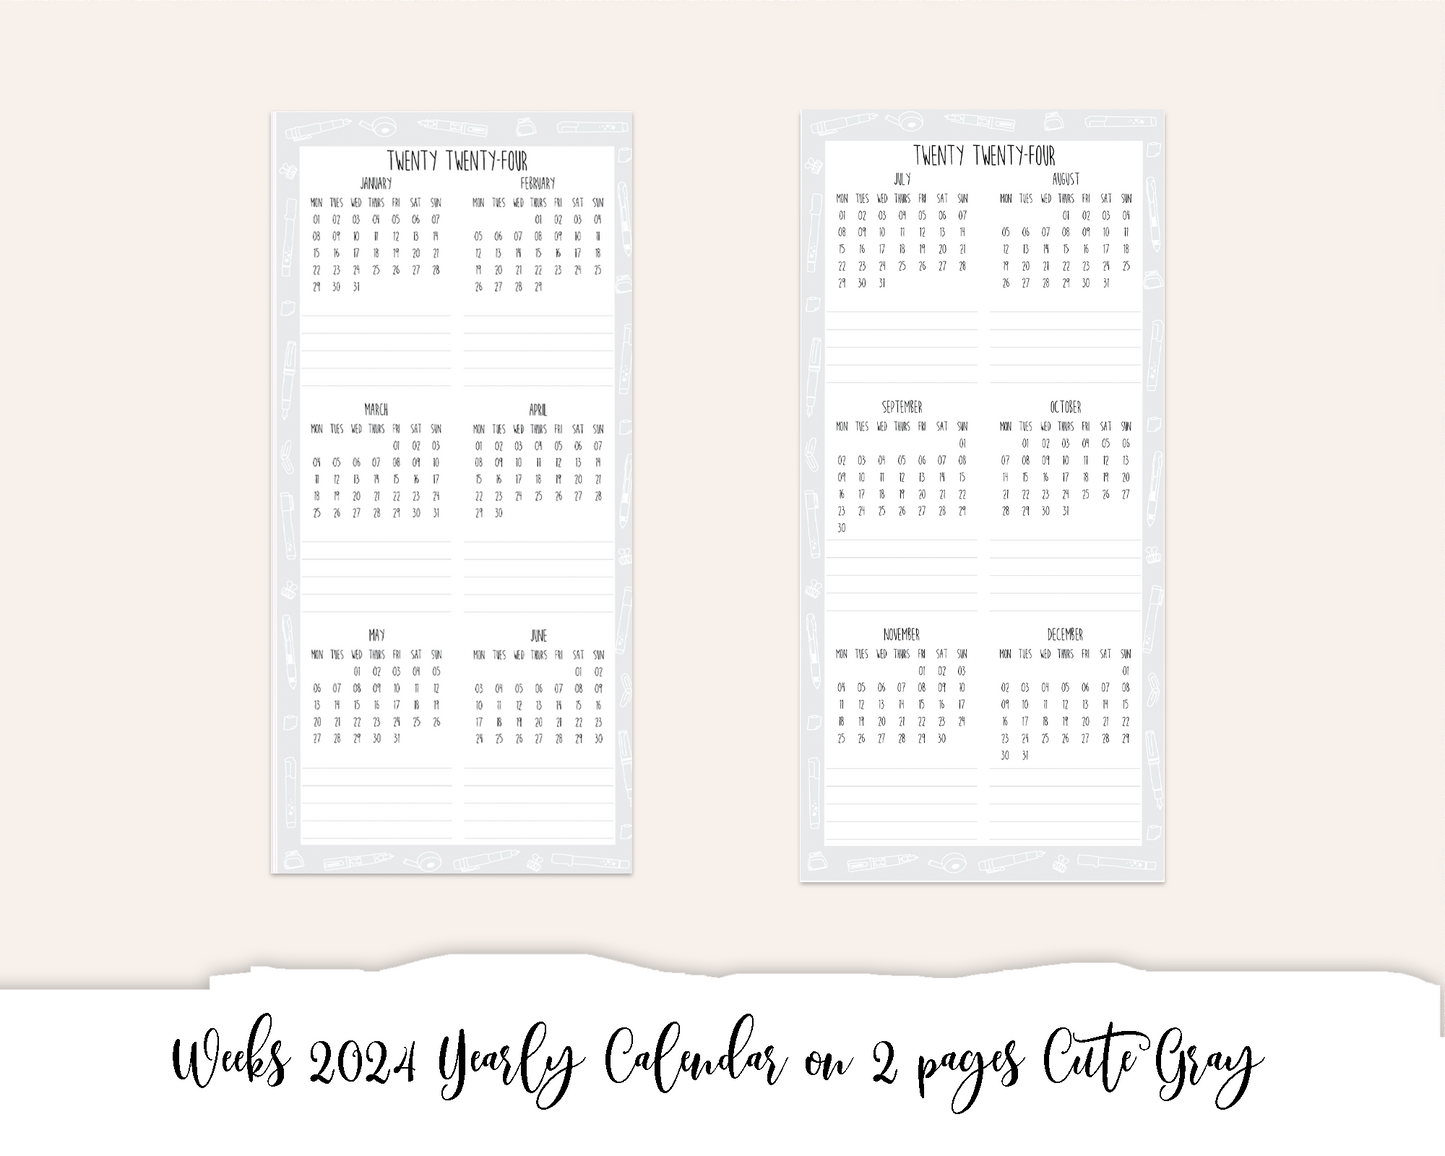 Weeks 2024 Yearly Calendar on 2 pages Cute Gray (Full Page Printable Stickers)